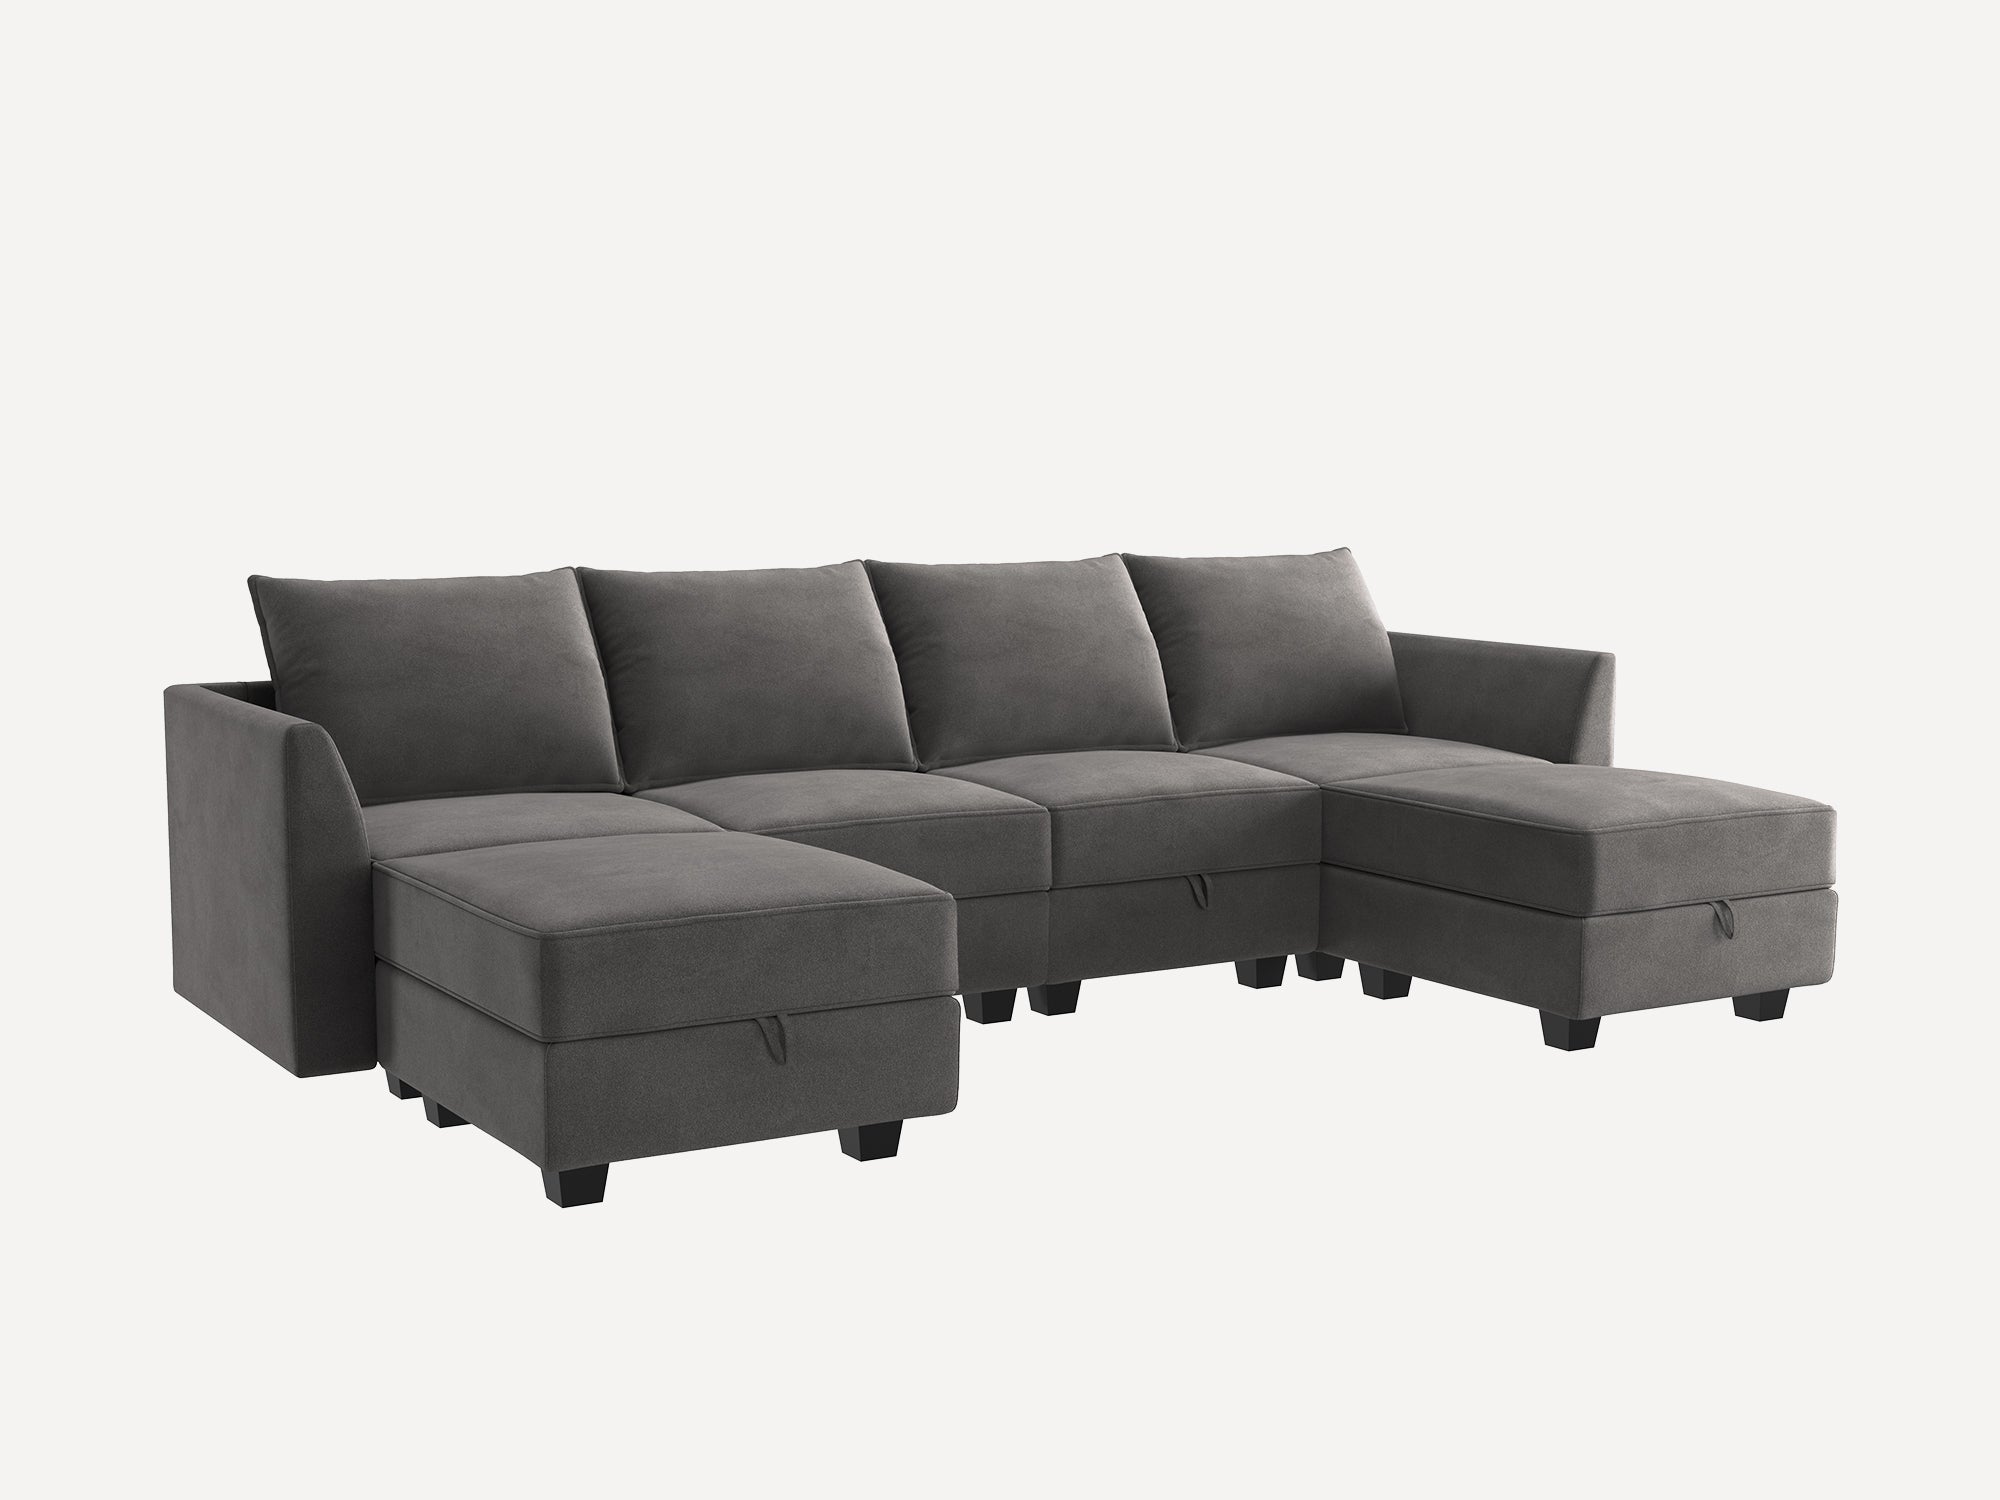 Honbay Velvet Sectional Sofa Couch Set with Chaise and Tufted Back Cushions for Living Room, Dull Grey, Size: Large Sectional sofa(Velvet), Gray